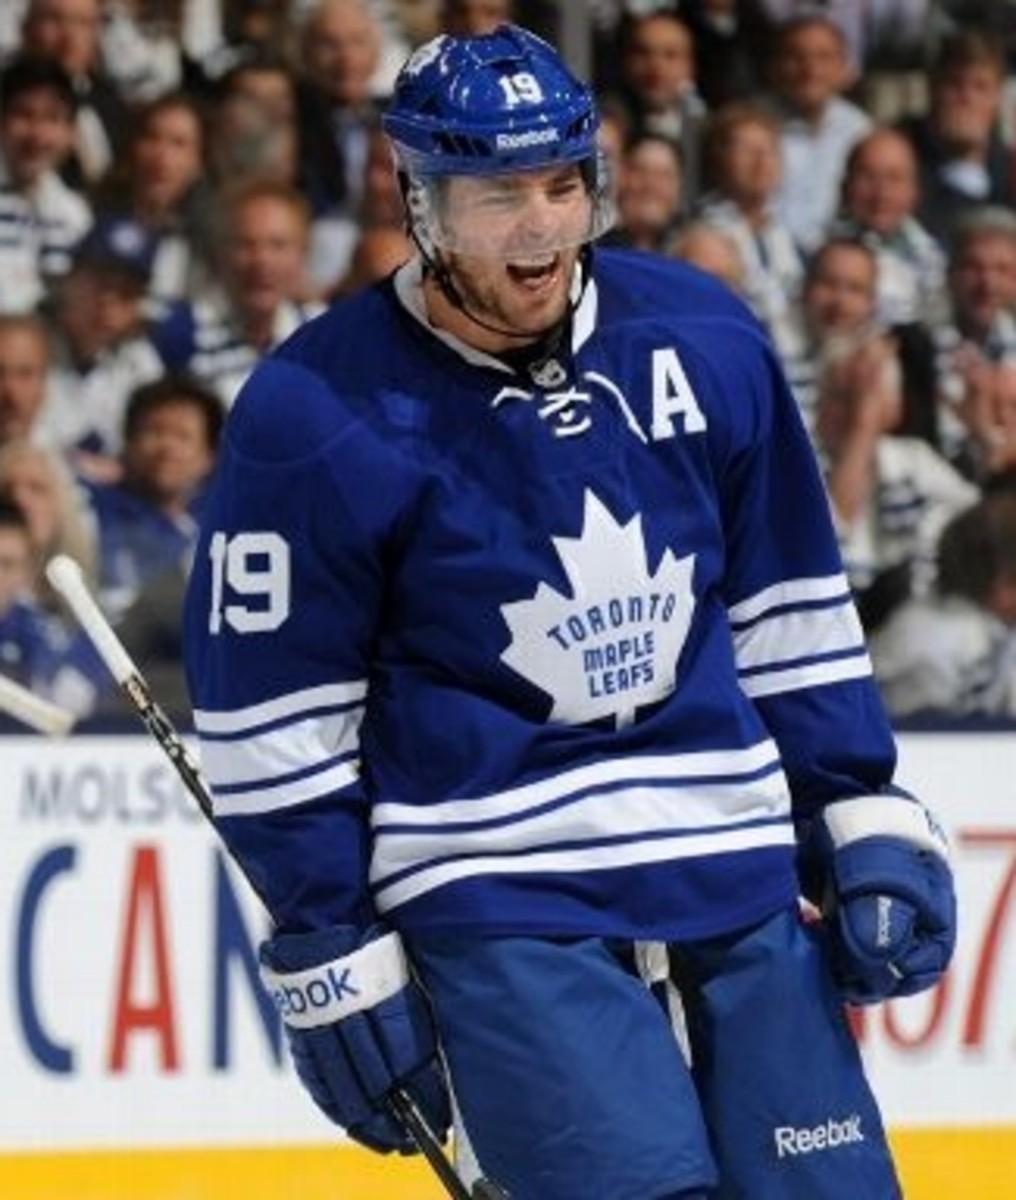 How about "Fruits Lupuls"? Above: Joffrey Lupul, RW, Toronto Maple Leafs.